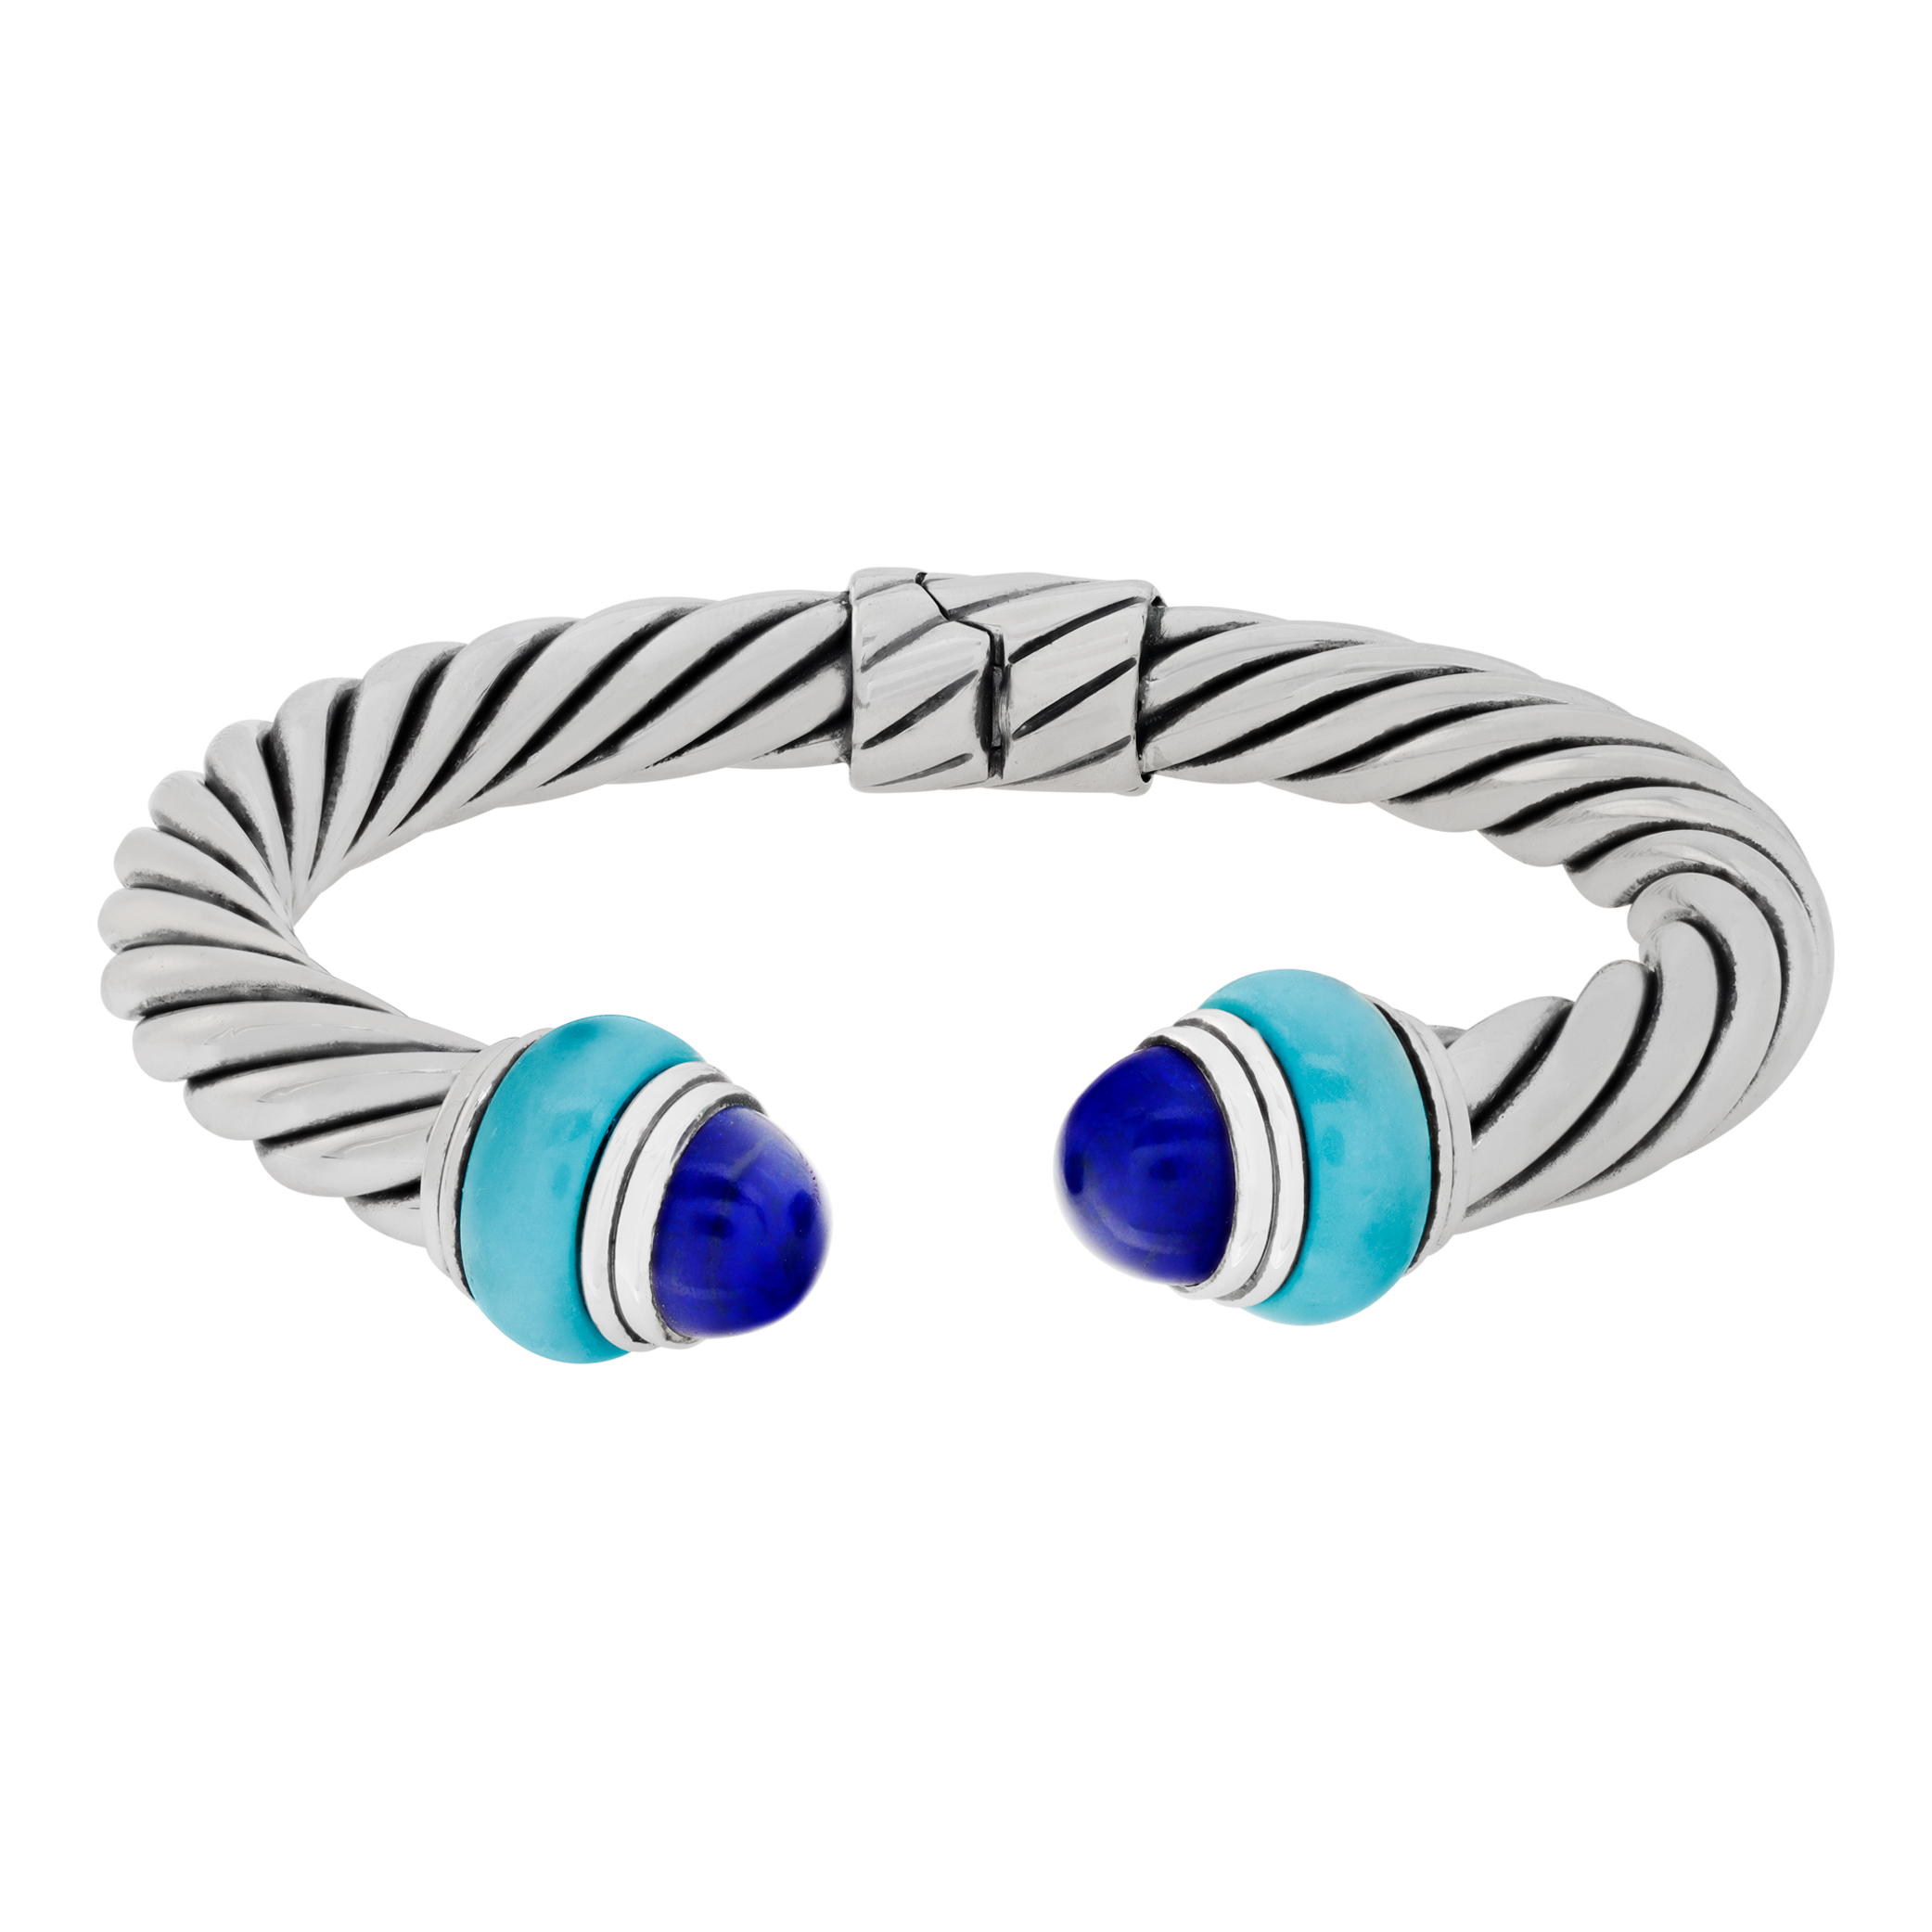 David Yurman cable bracelet in sterling silver with turquoise & blue enamel